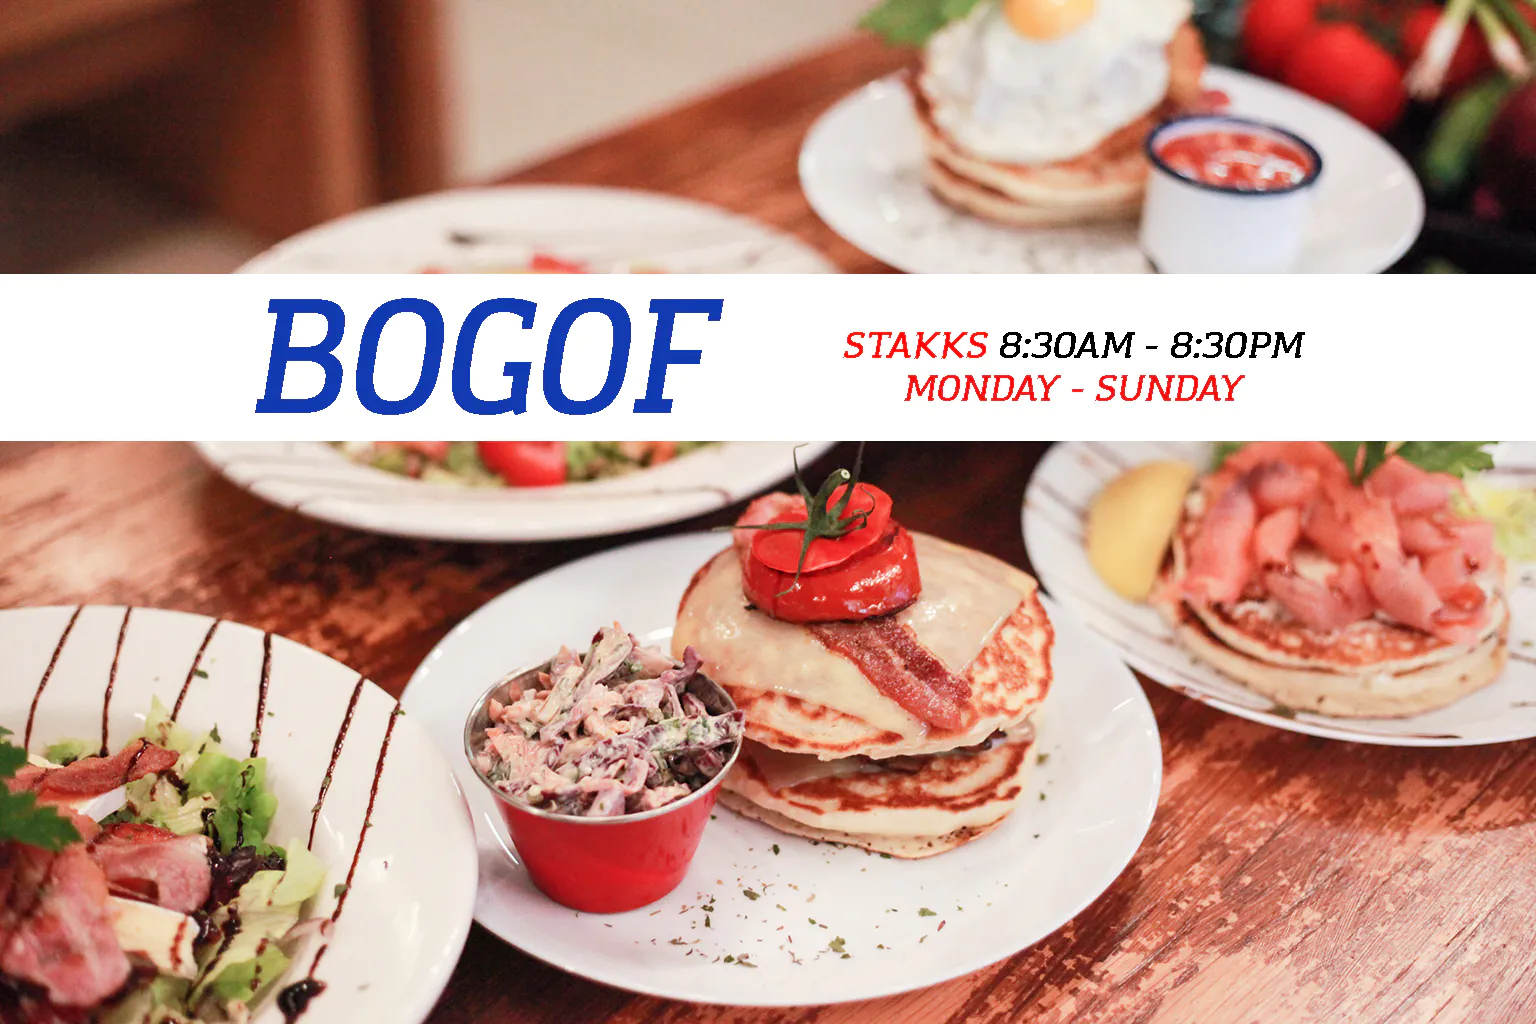 6th – 12th May BOGOF – STAKKS WEEKLY OFFERS